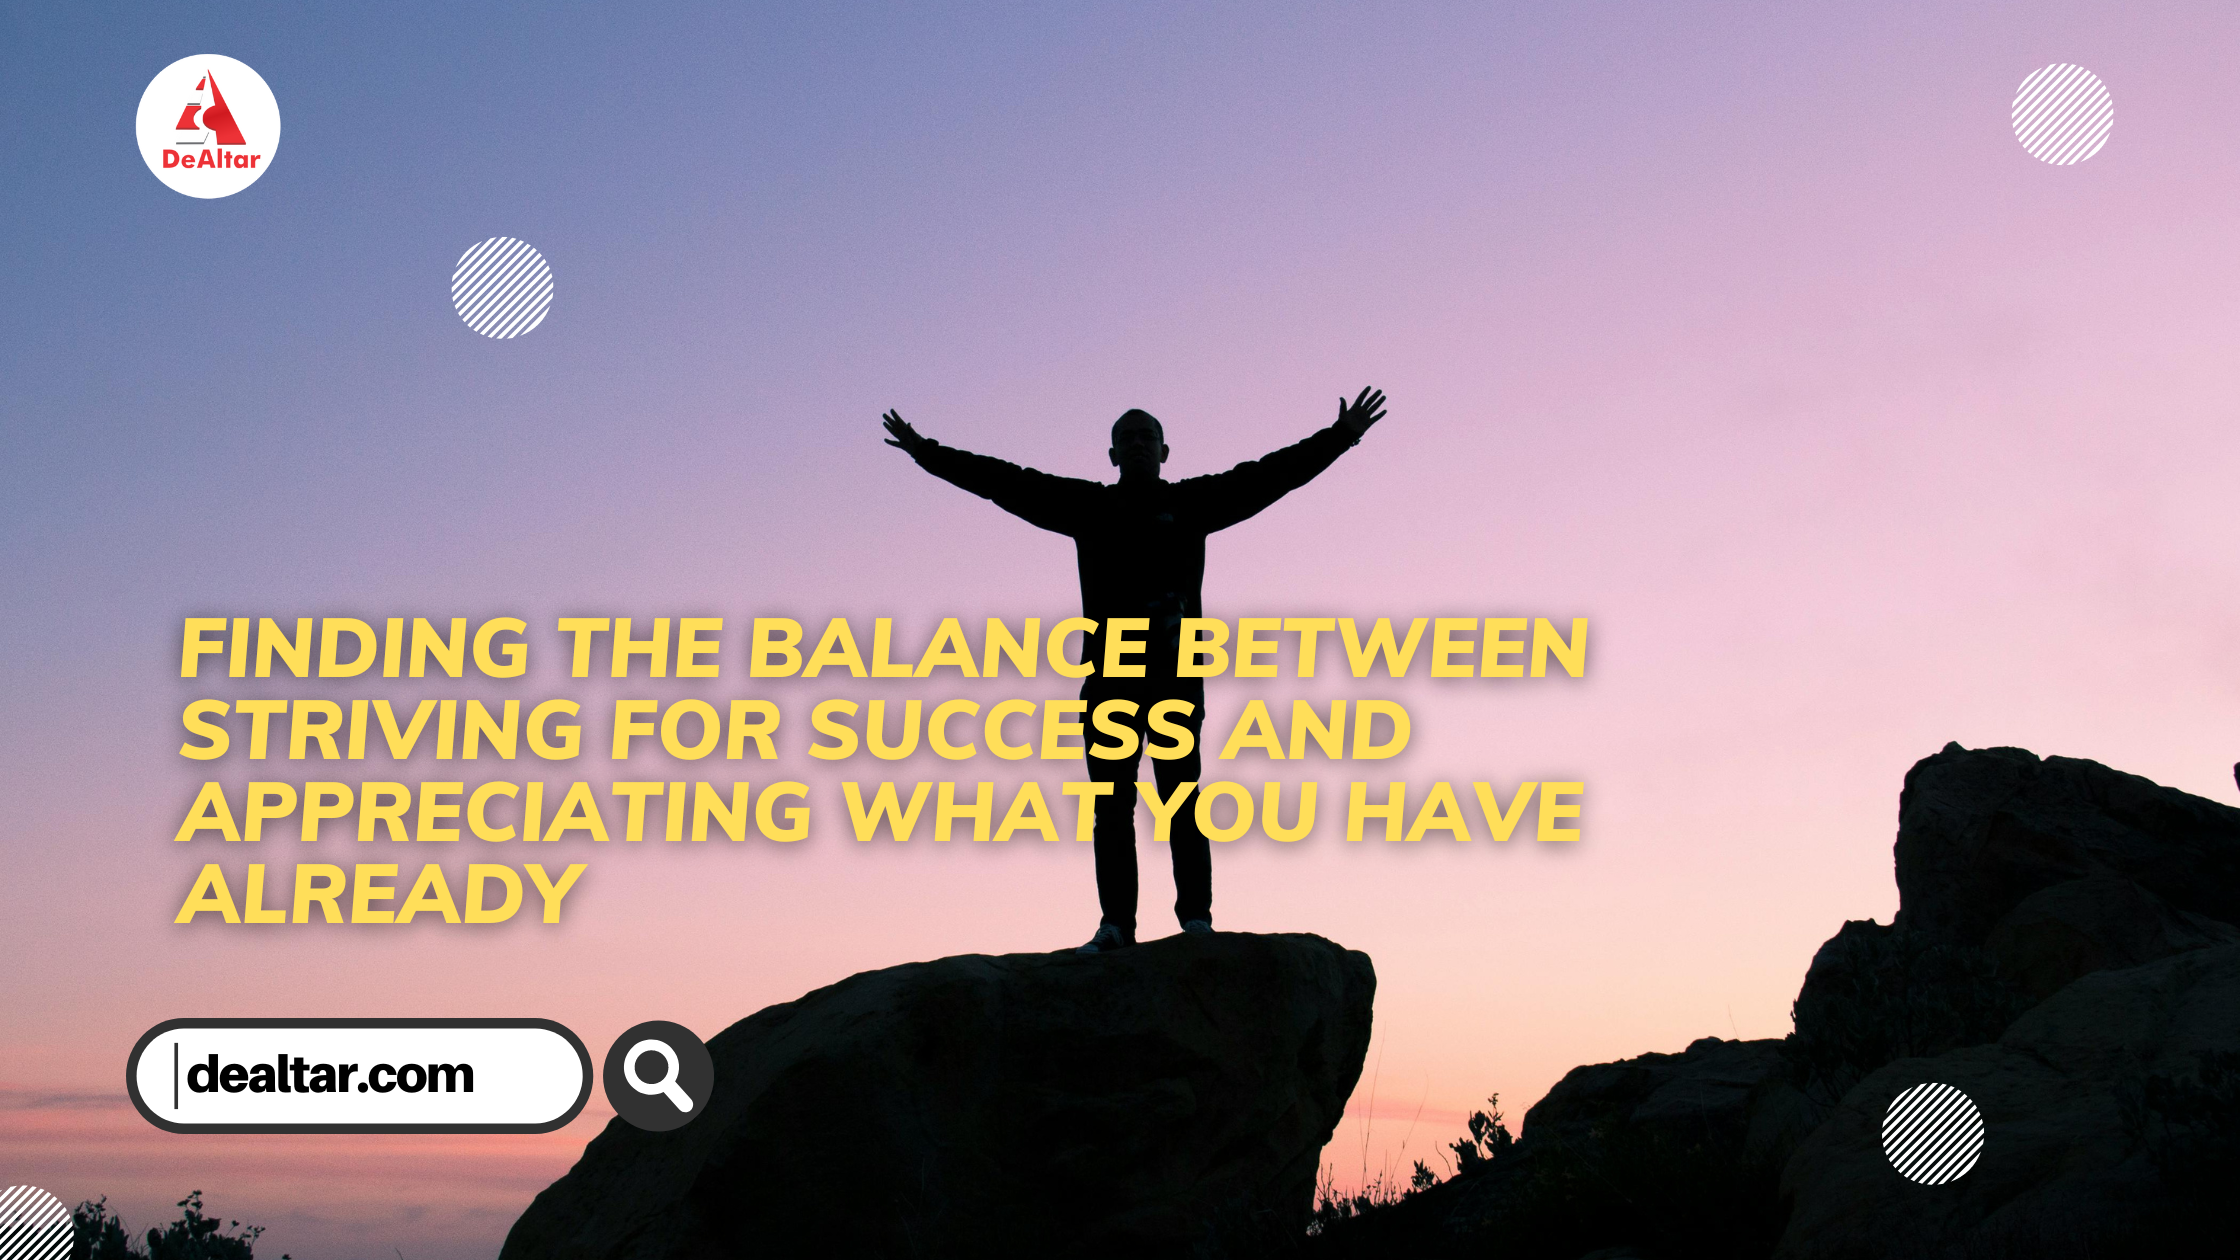 Finding the balance between striving for success and appreciating what you have already